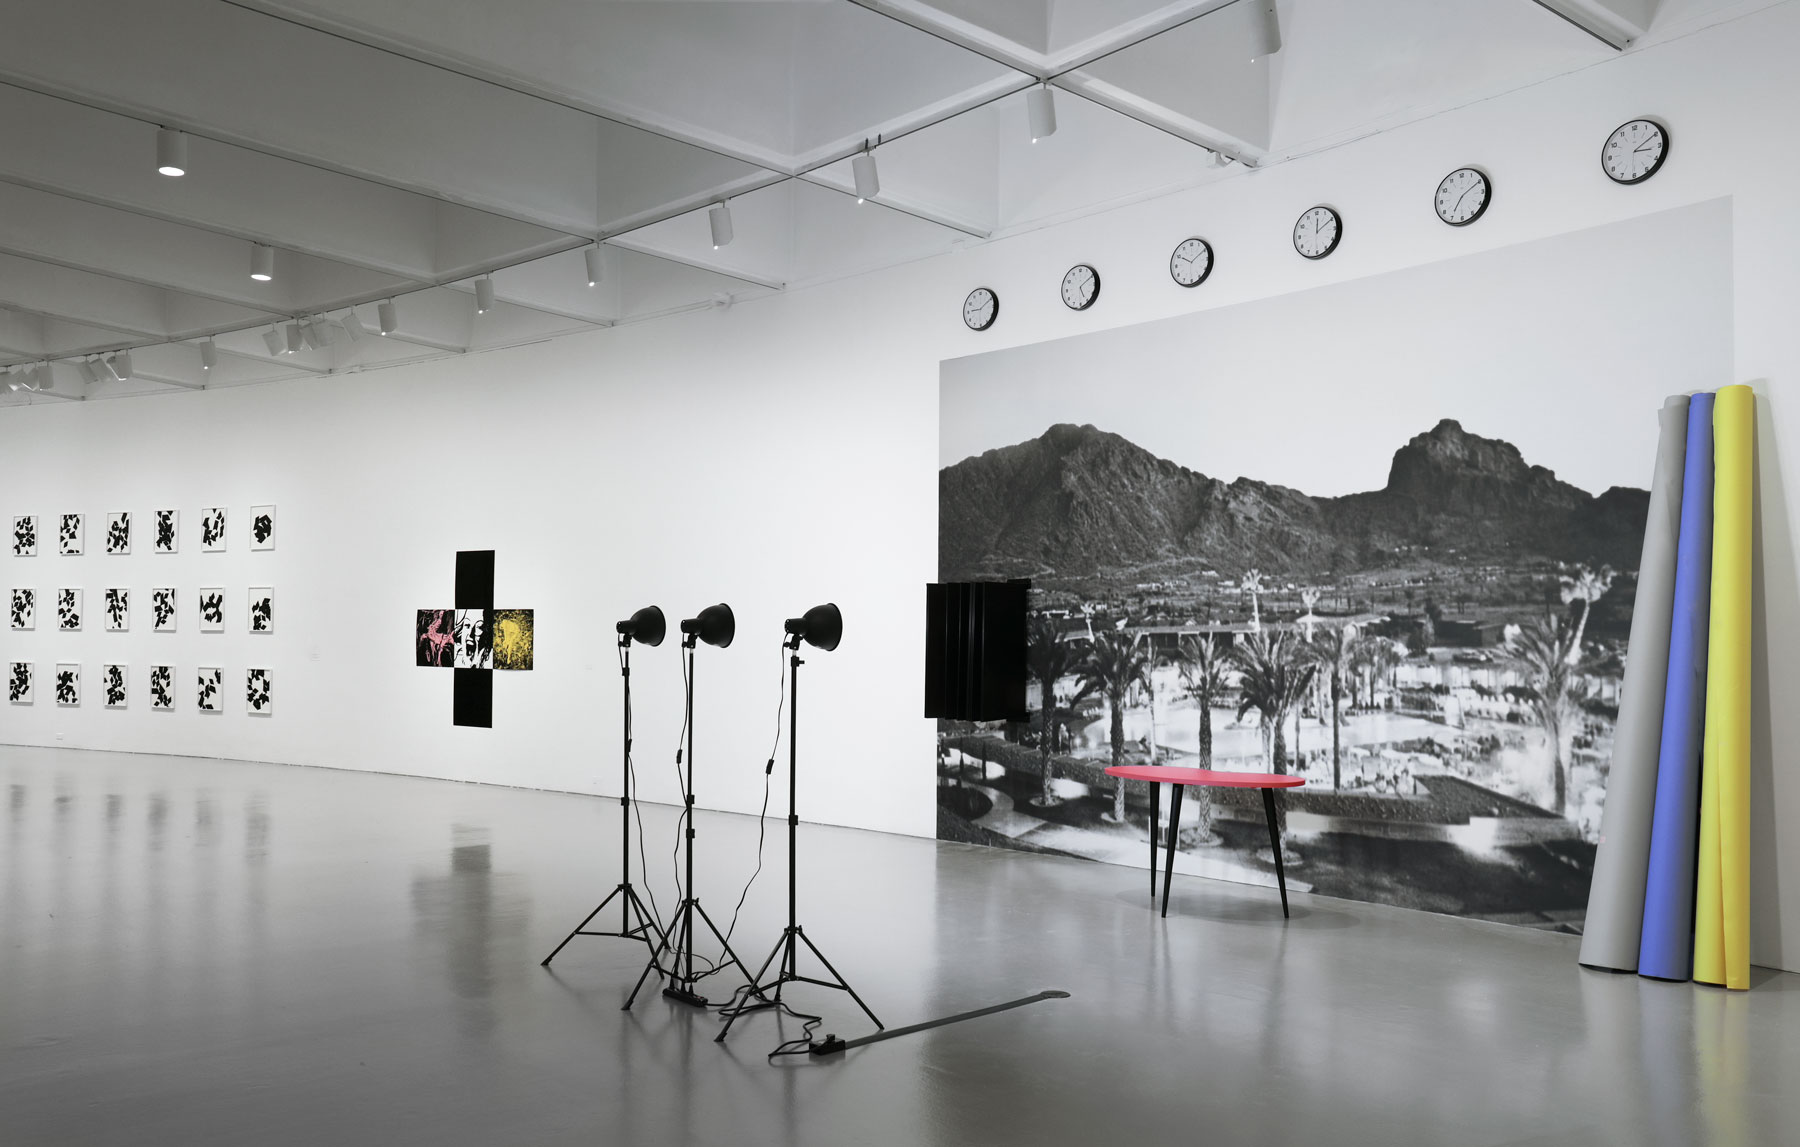 Installation view with works by James Welling, Gretchen Bender and Barbara Bloom. Photo: Cathy Carver, Hirshhorn Museum